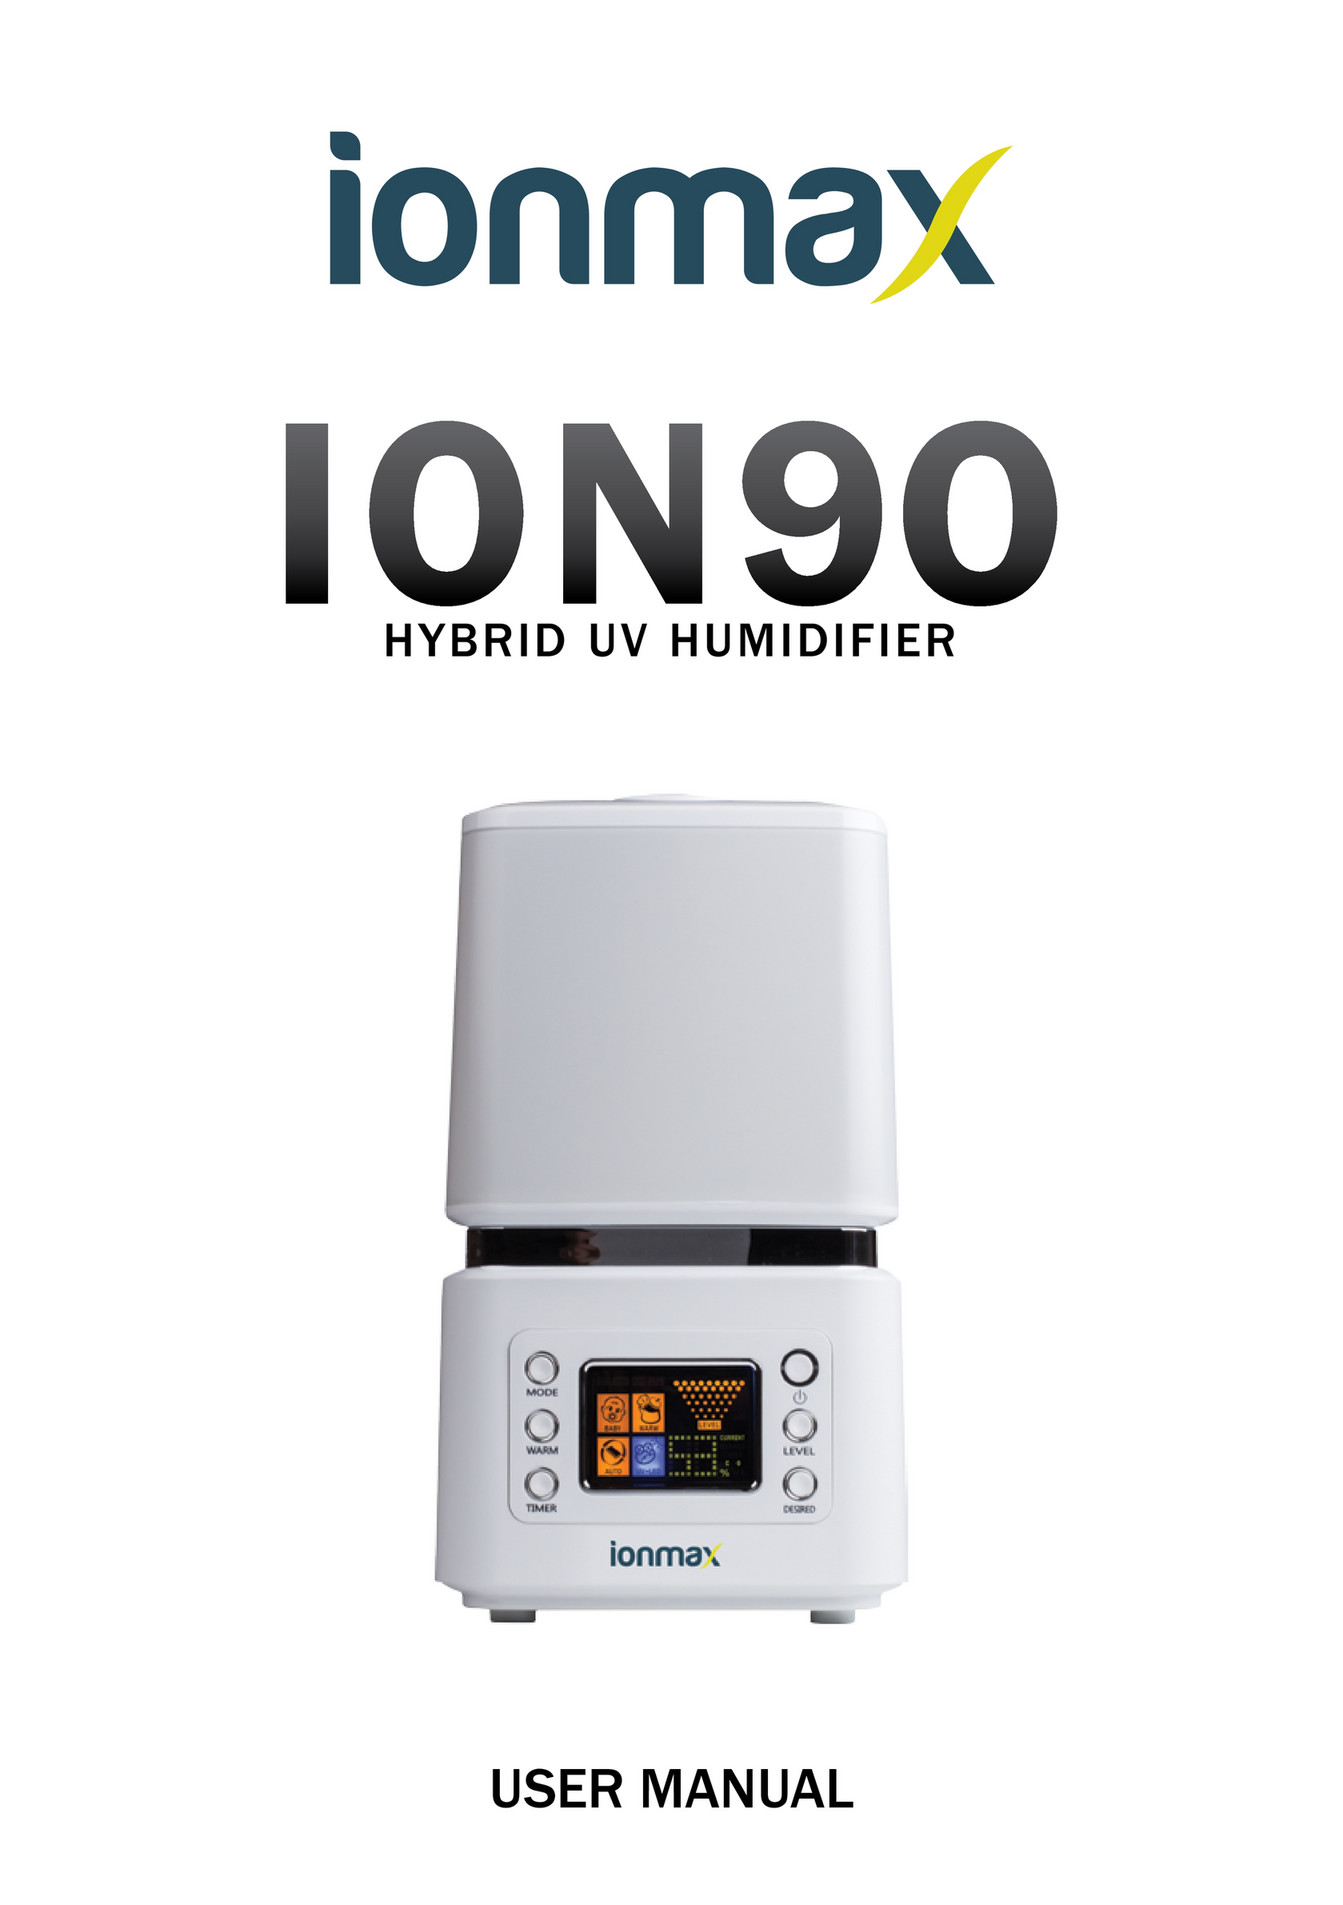 Andatech Ionmax Ion90 User Manual Page 1 Created With